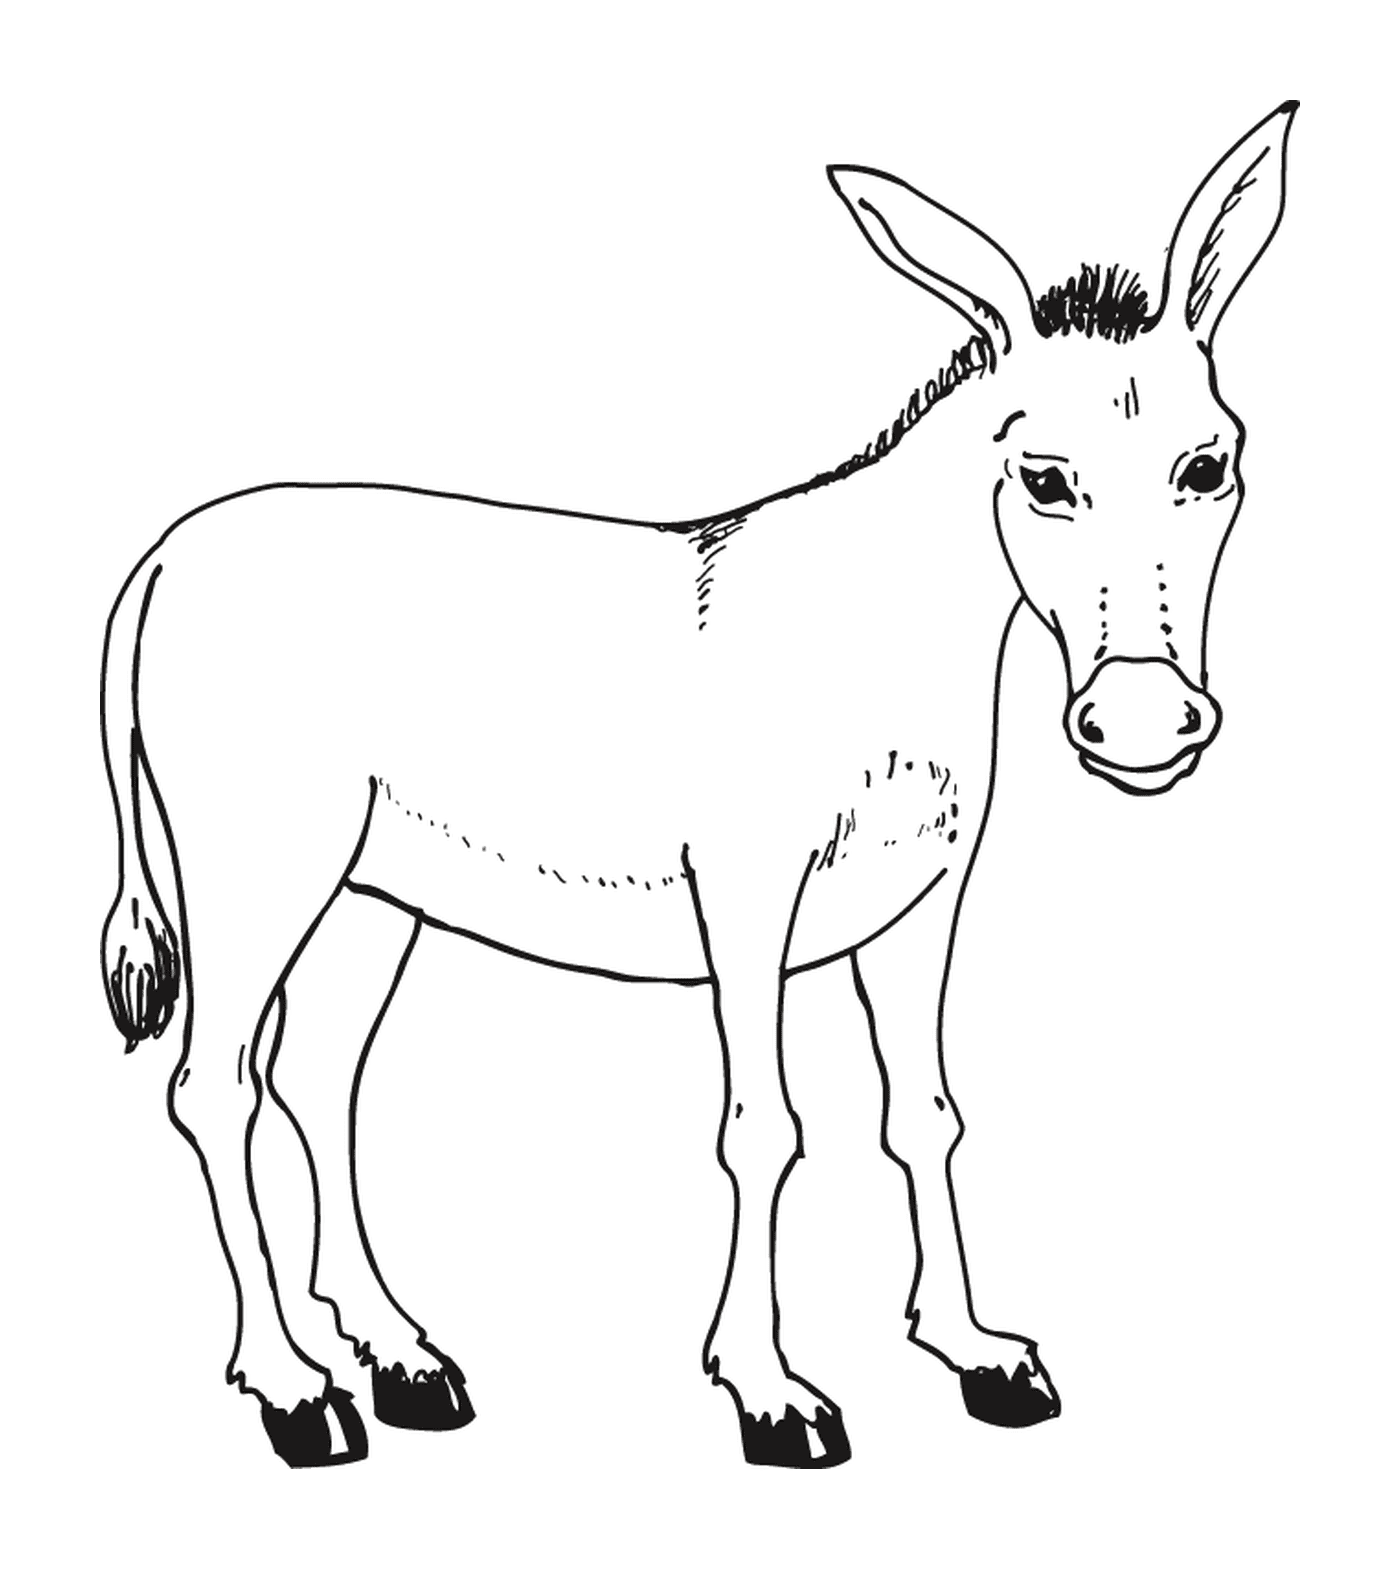  A donkey standing in a field 